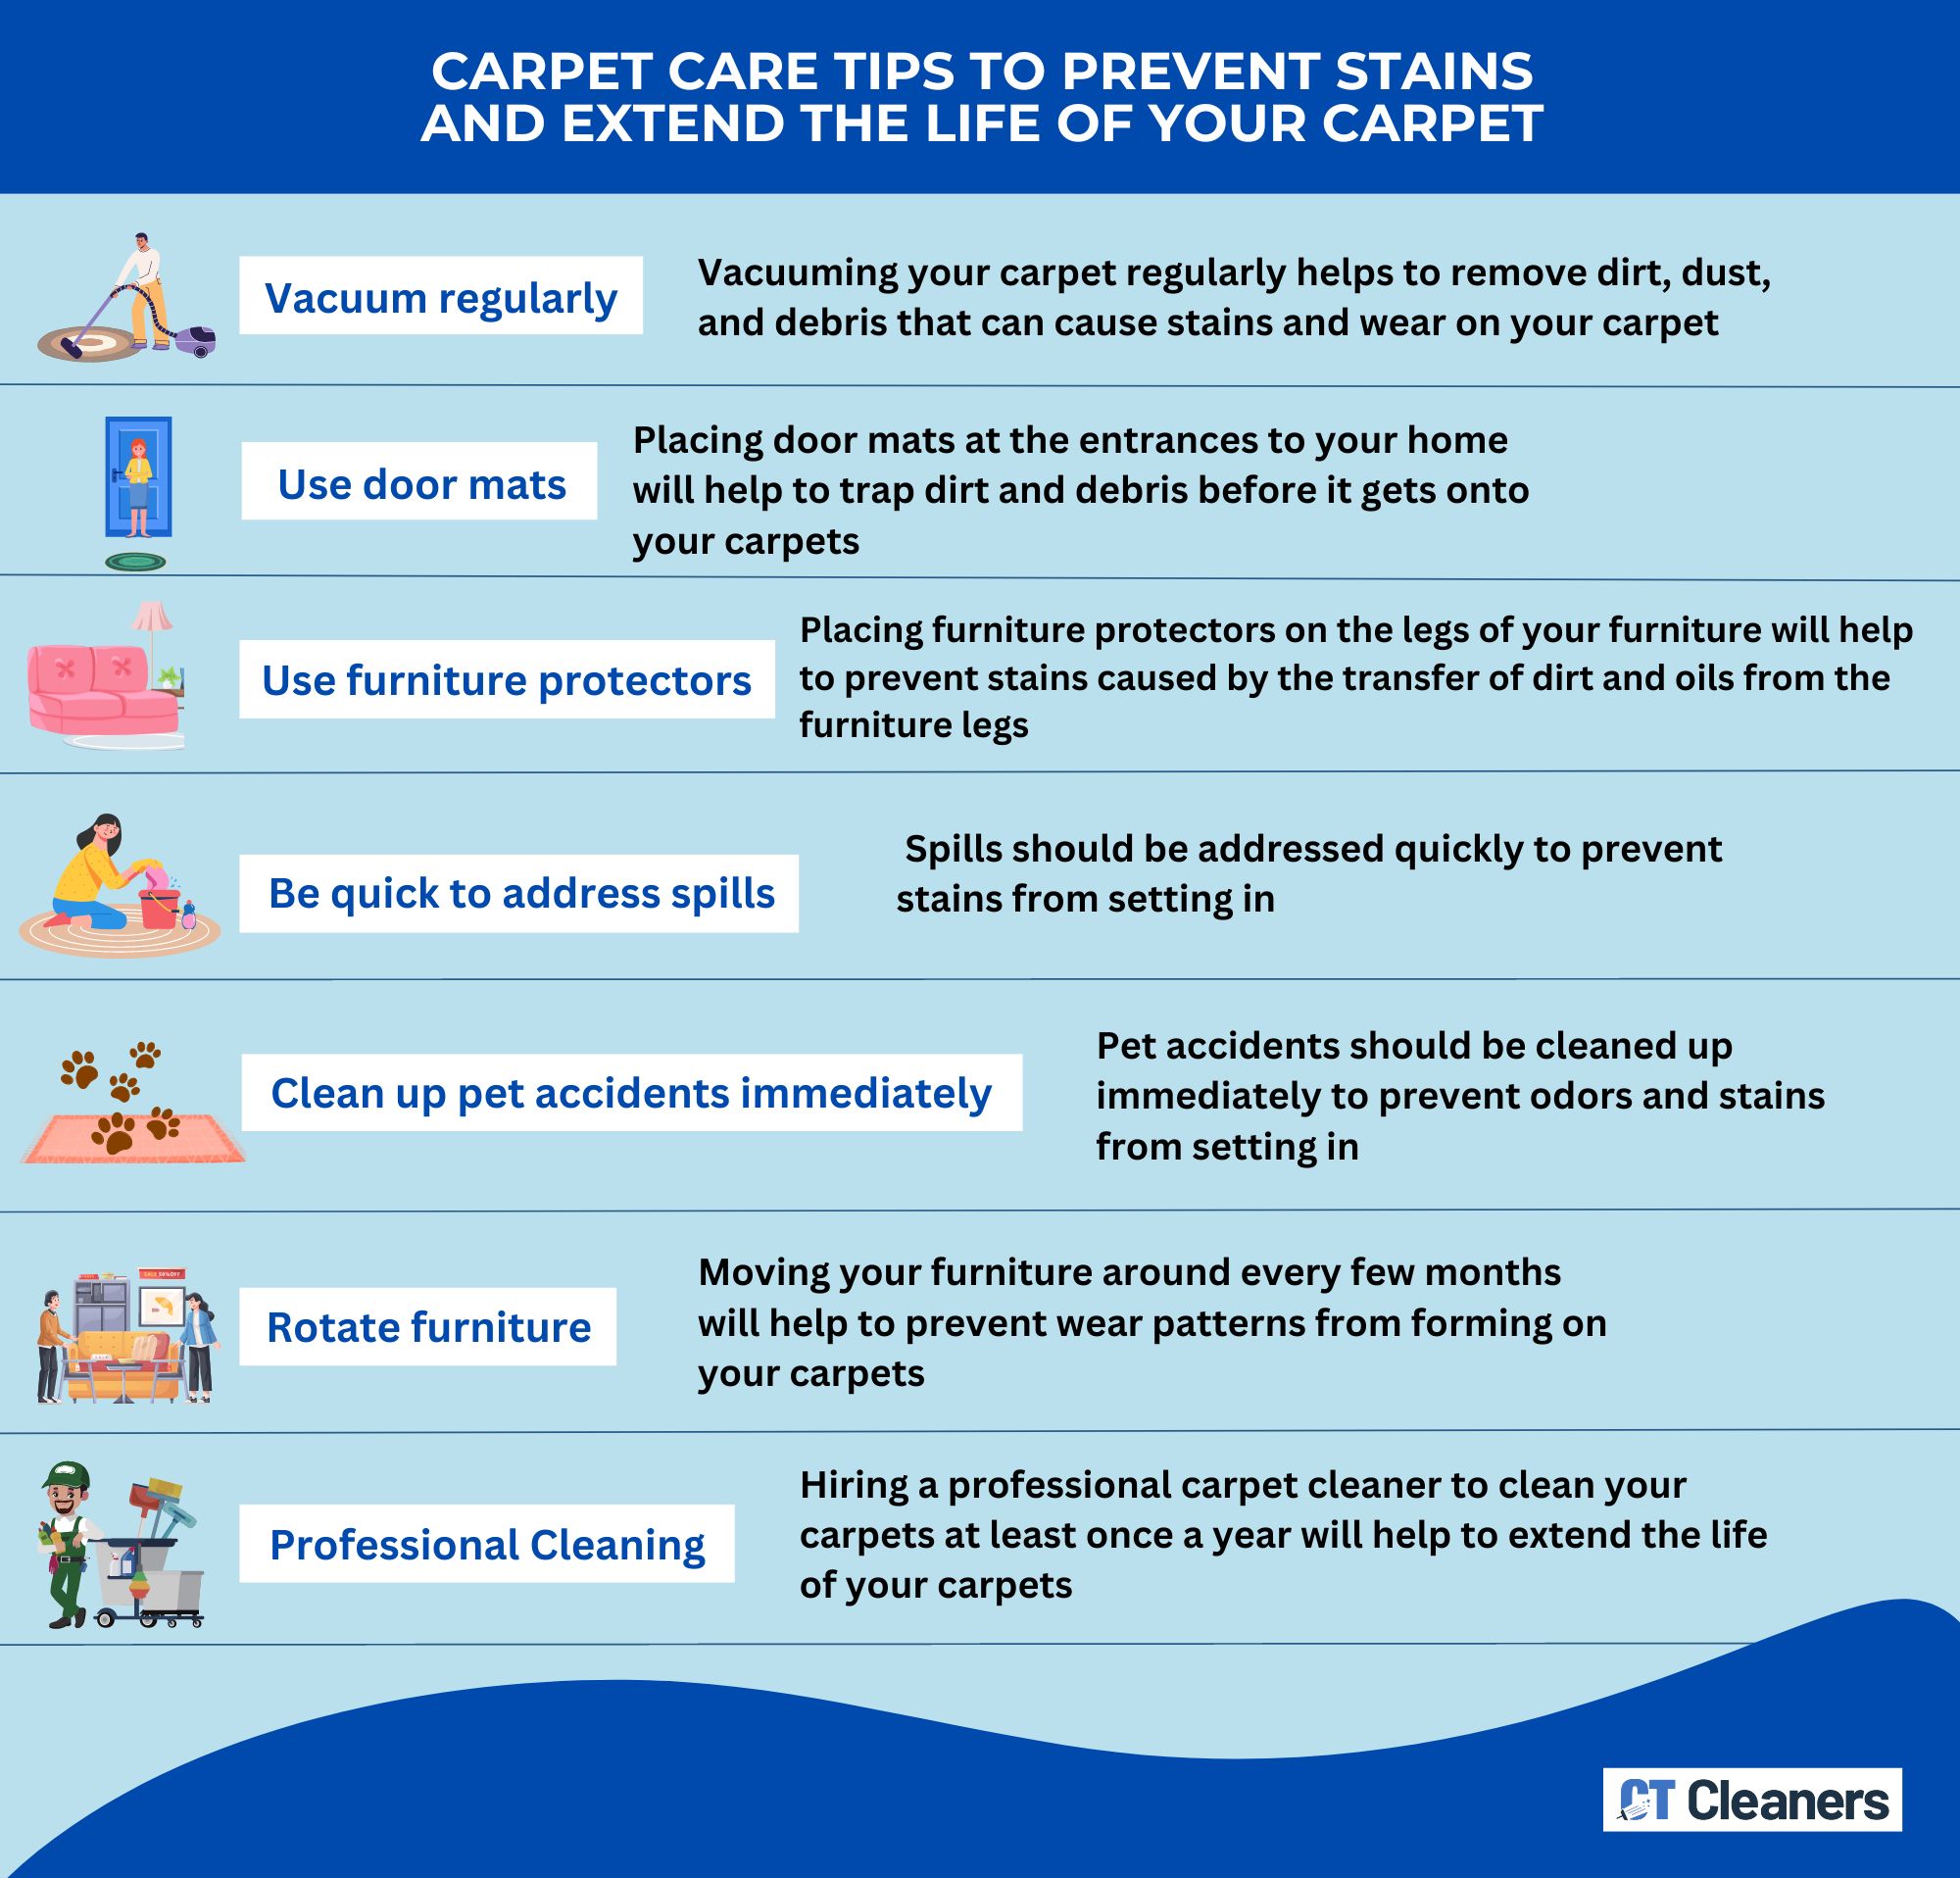 Carpet Care Tips to Prevent Stains and Extend the Life of Your Carpet